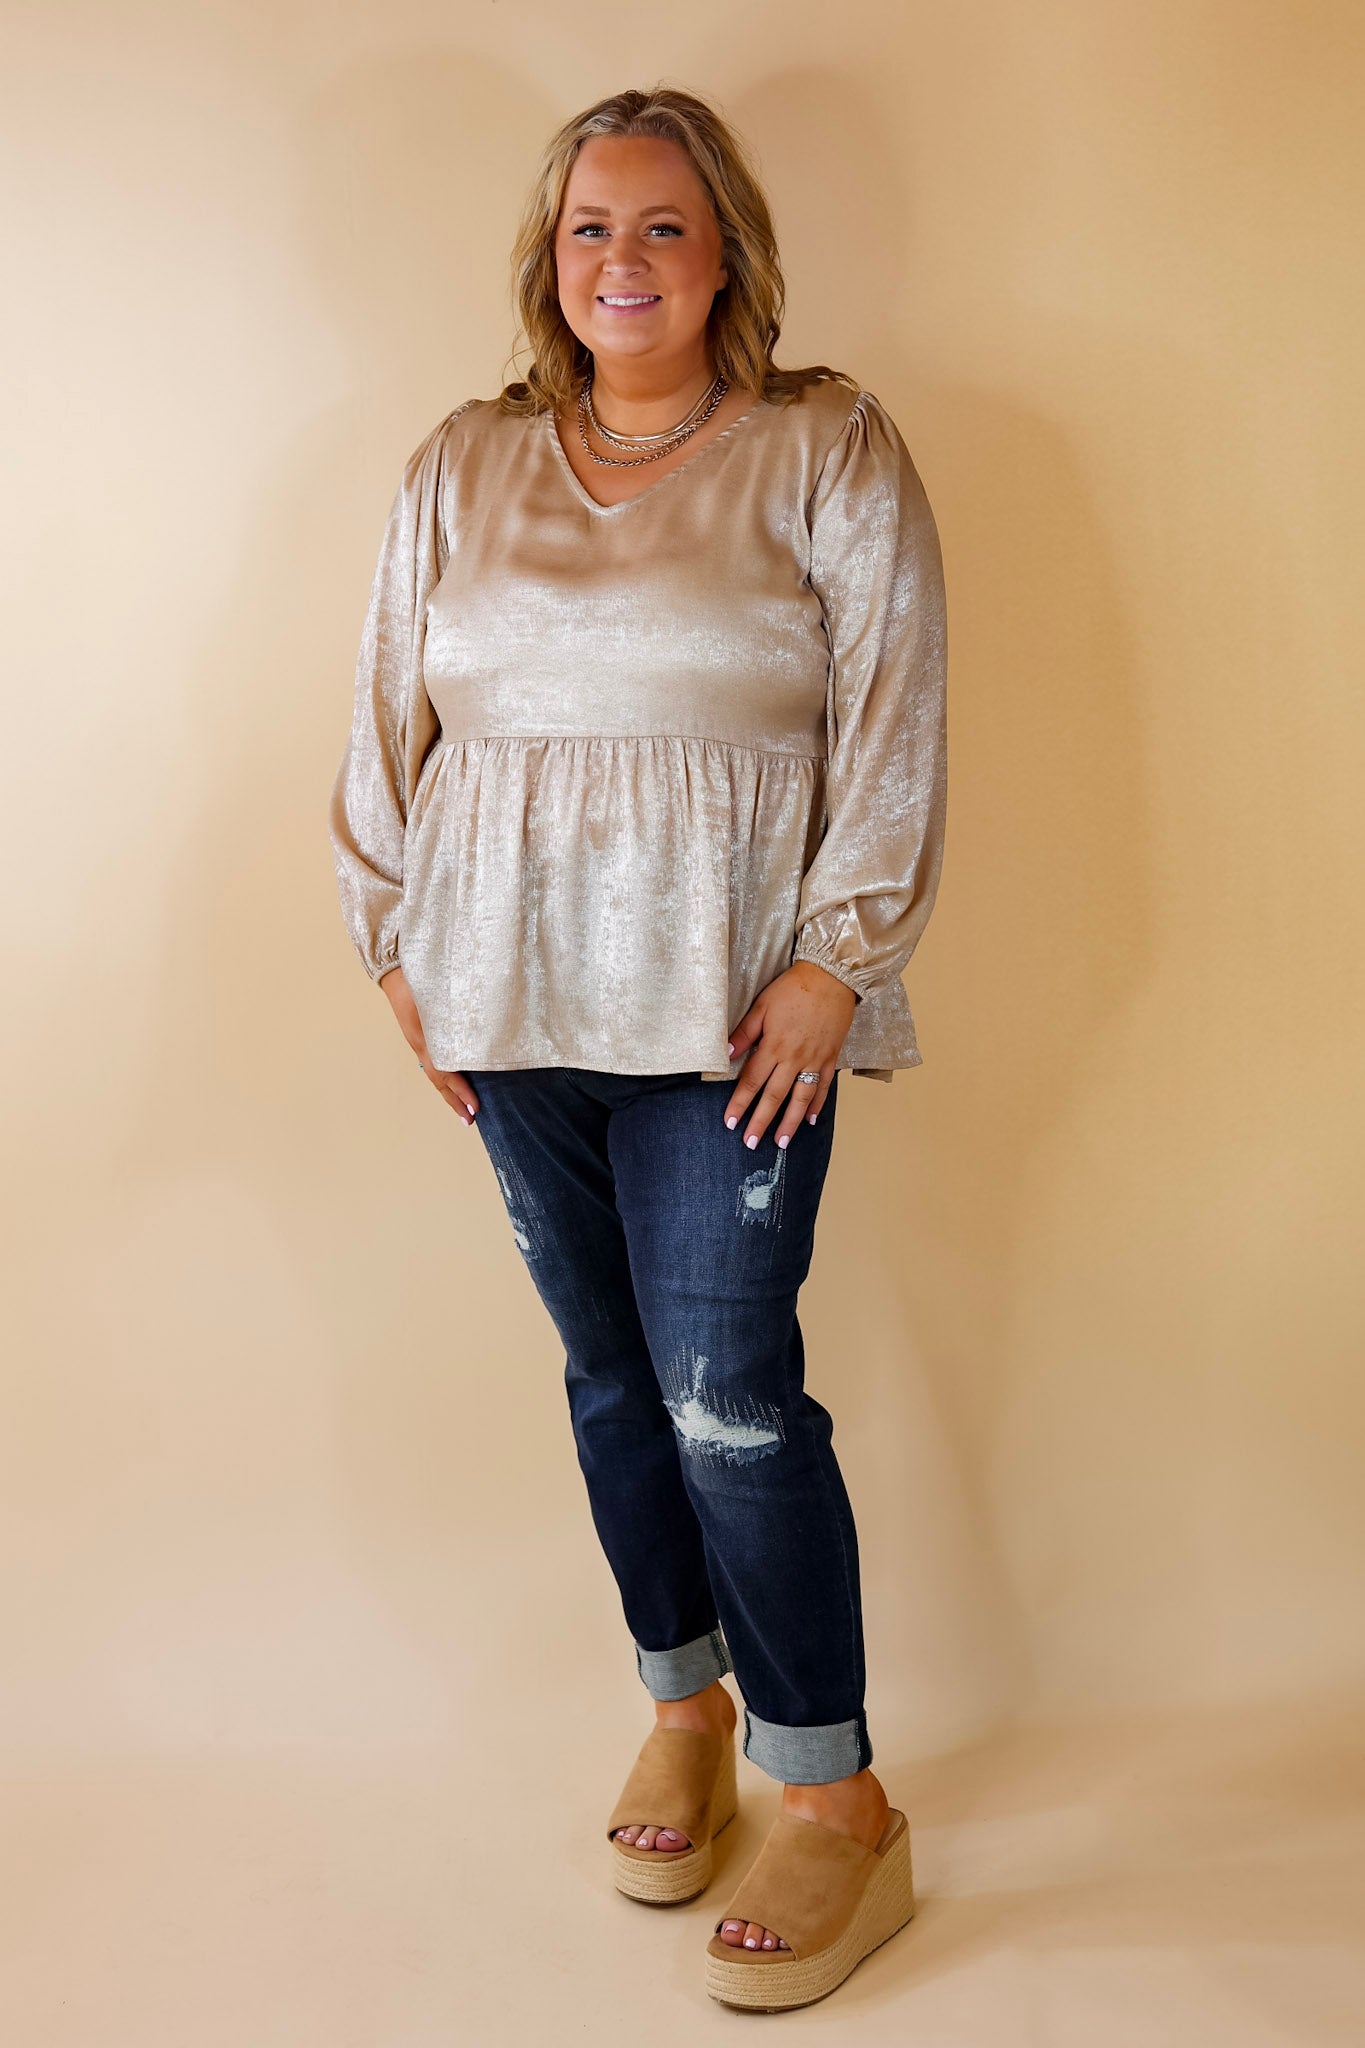 Popular Opinion Metallic V Neck Peplum Top with Long Sleeves in Champagne - Giddy Up Glamour Boutique